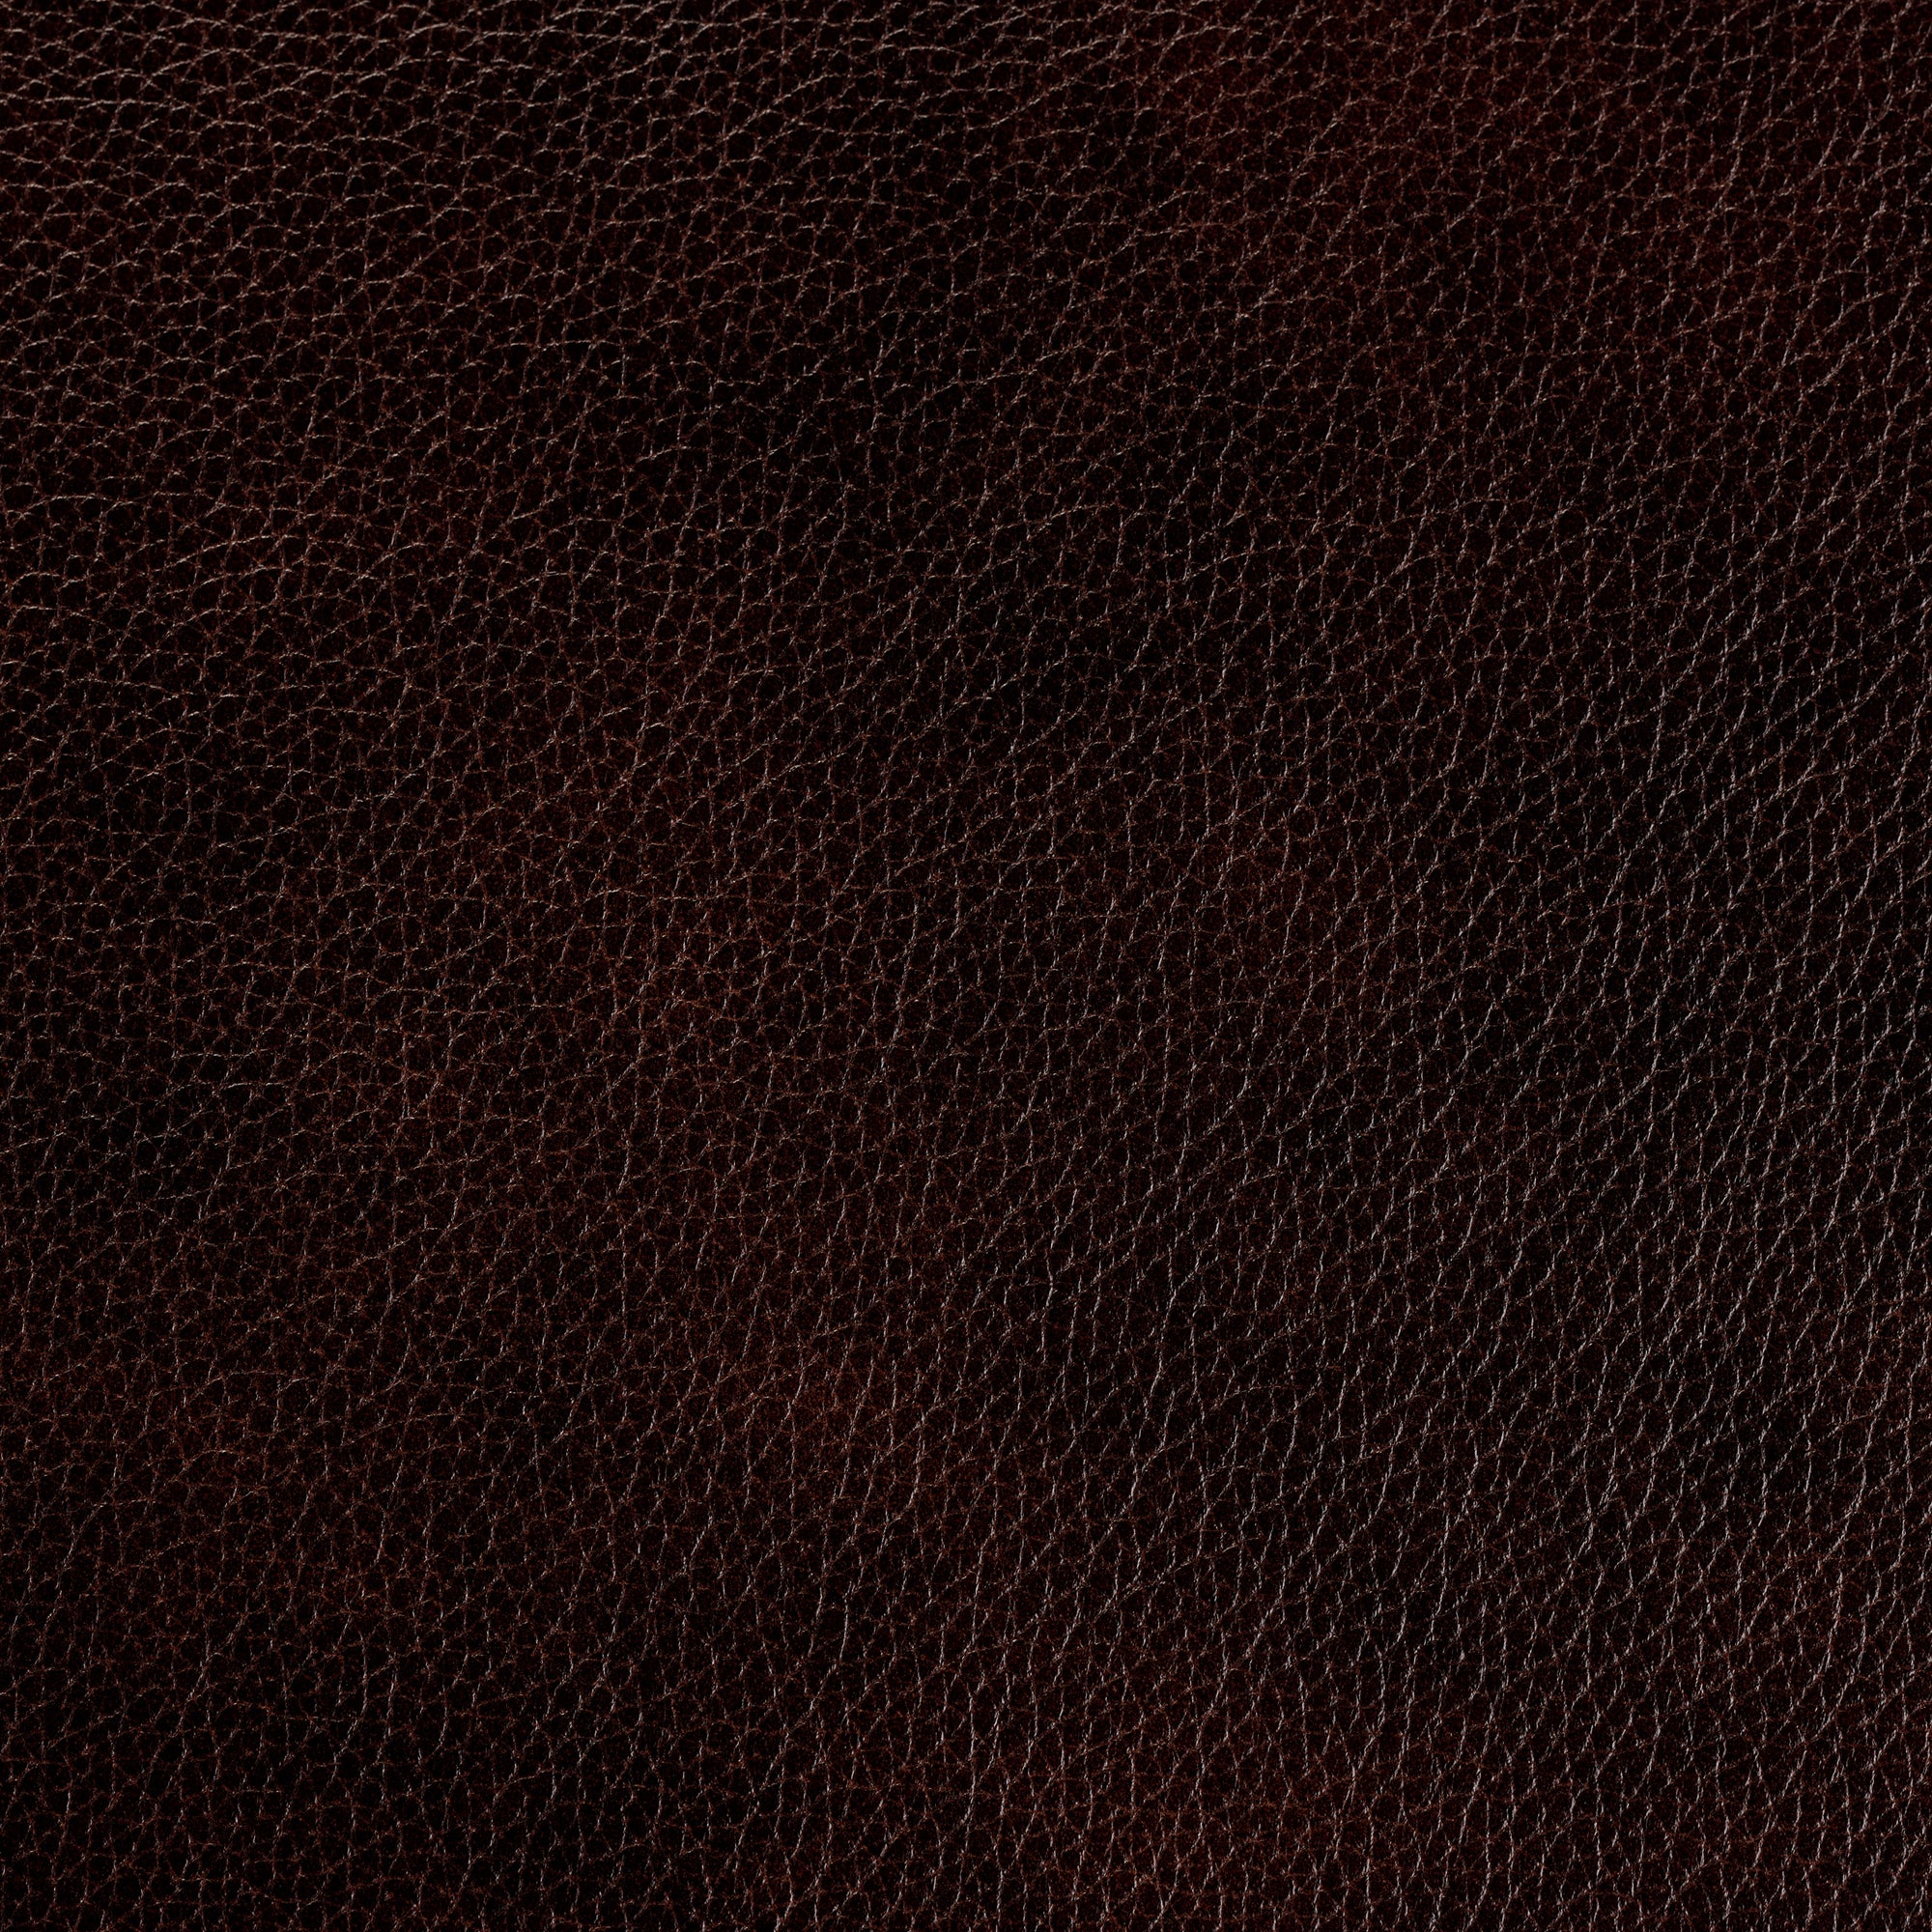 Chocolate Vintage Leather - Swatch